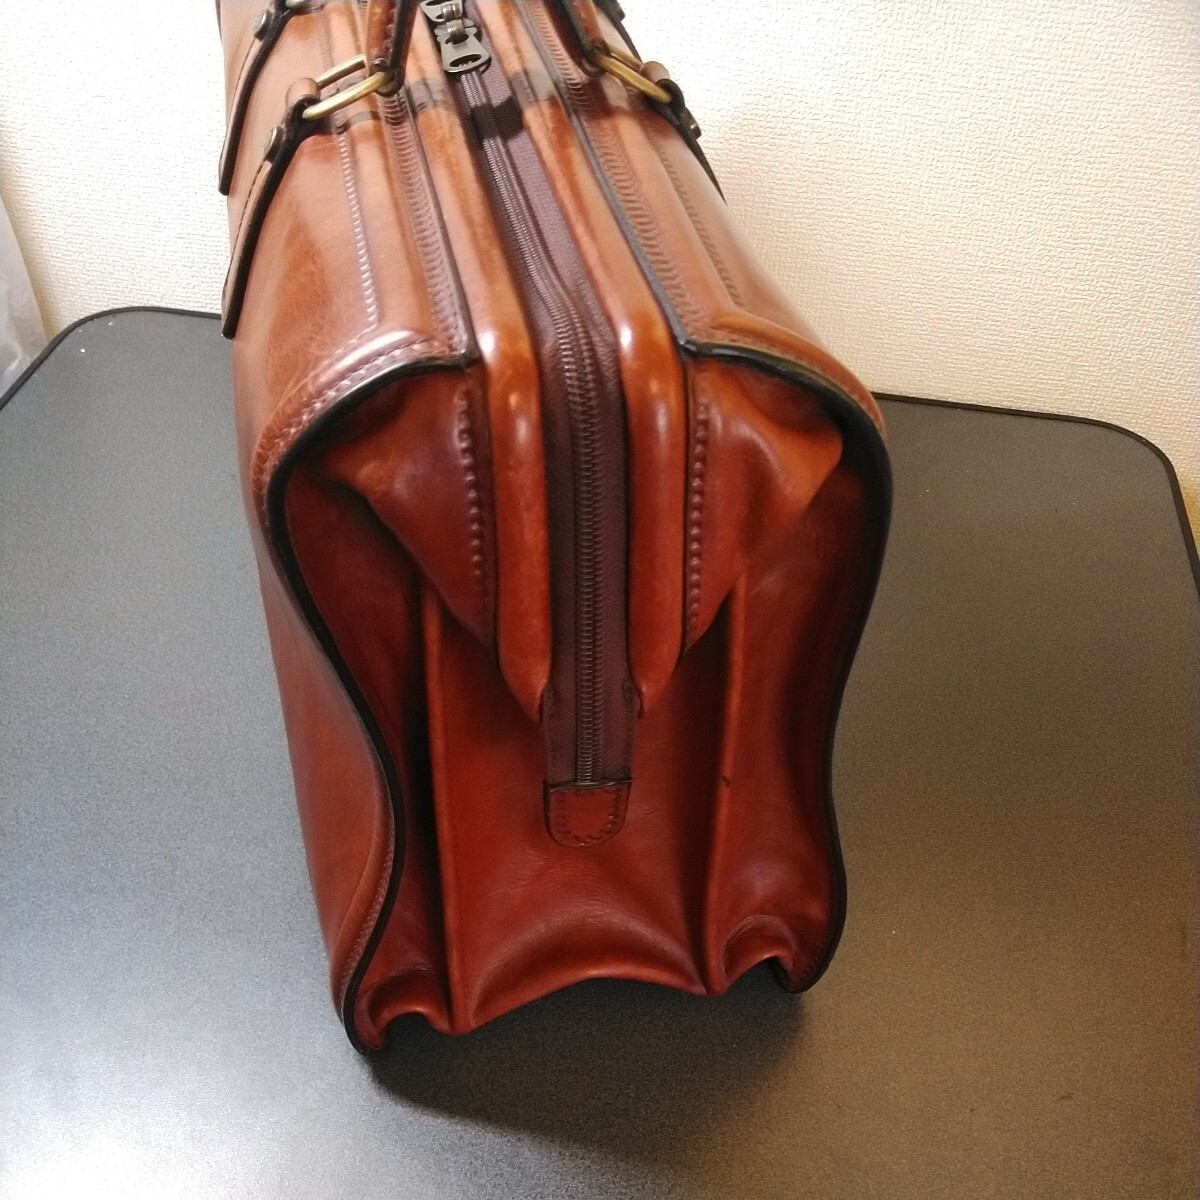  beautiful goods Barantani plant tongue person .. leather hand made Dulles bag Italy made buy price 180000 jpy 